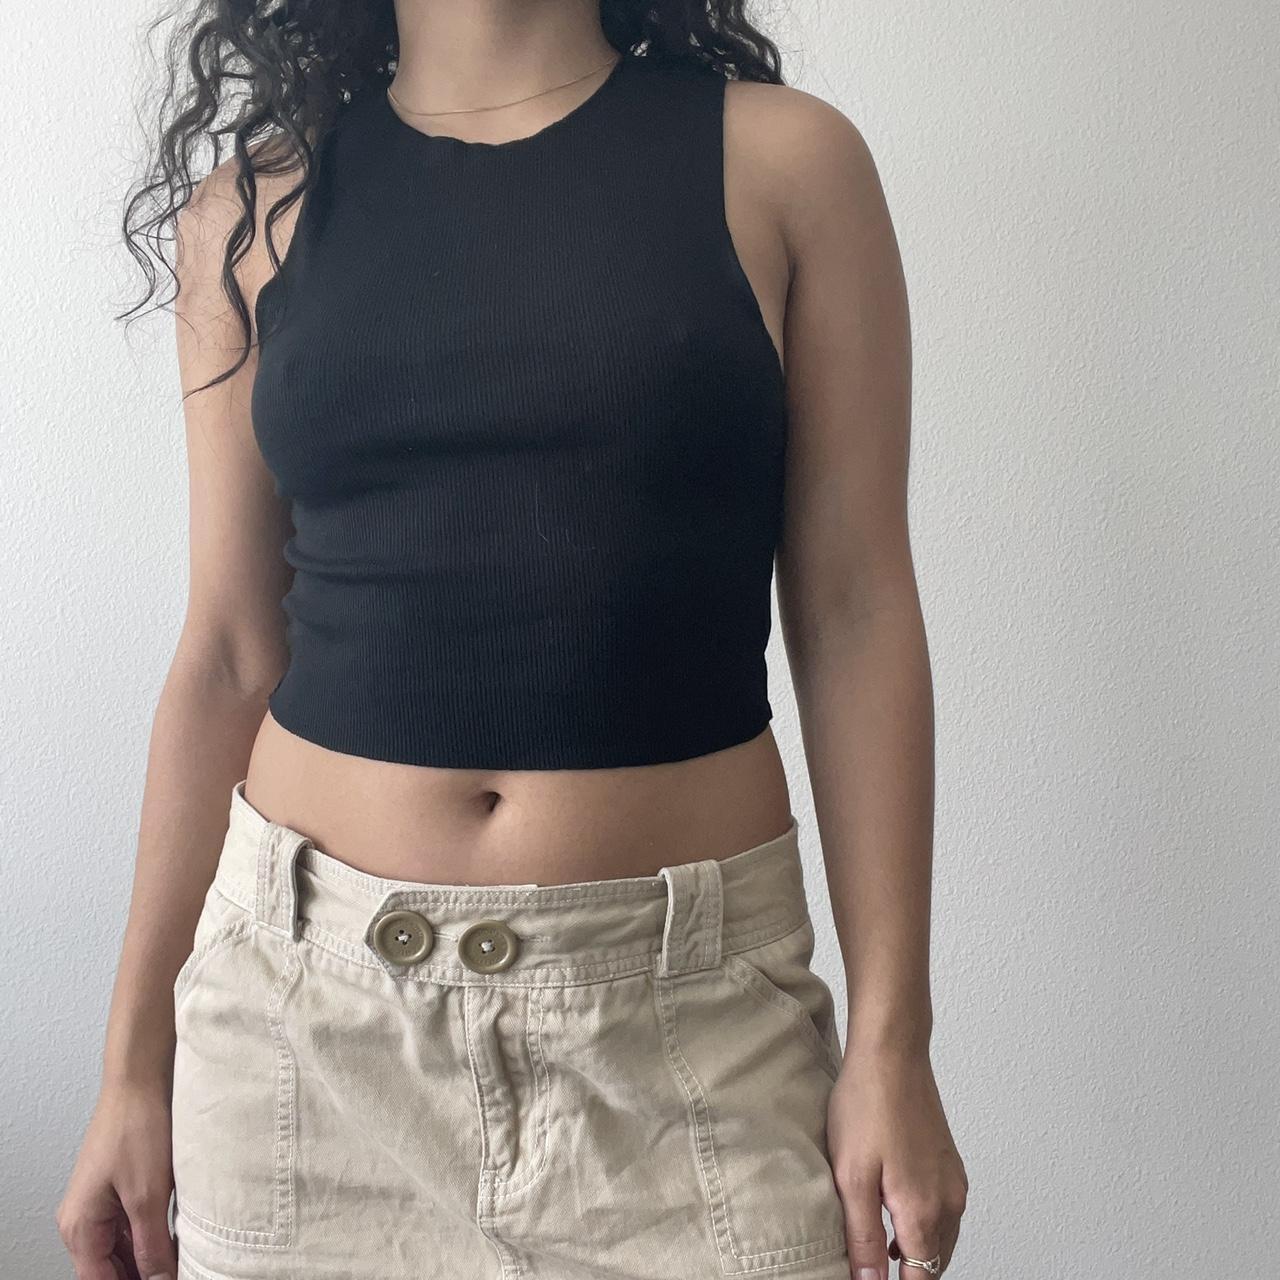 Zara Black Crop Tank Top, Available until marked